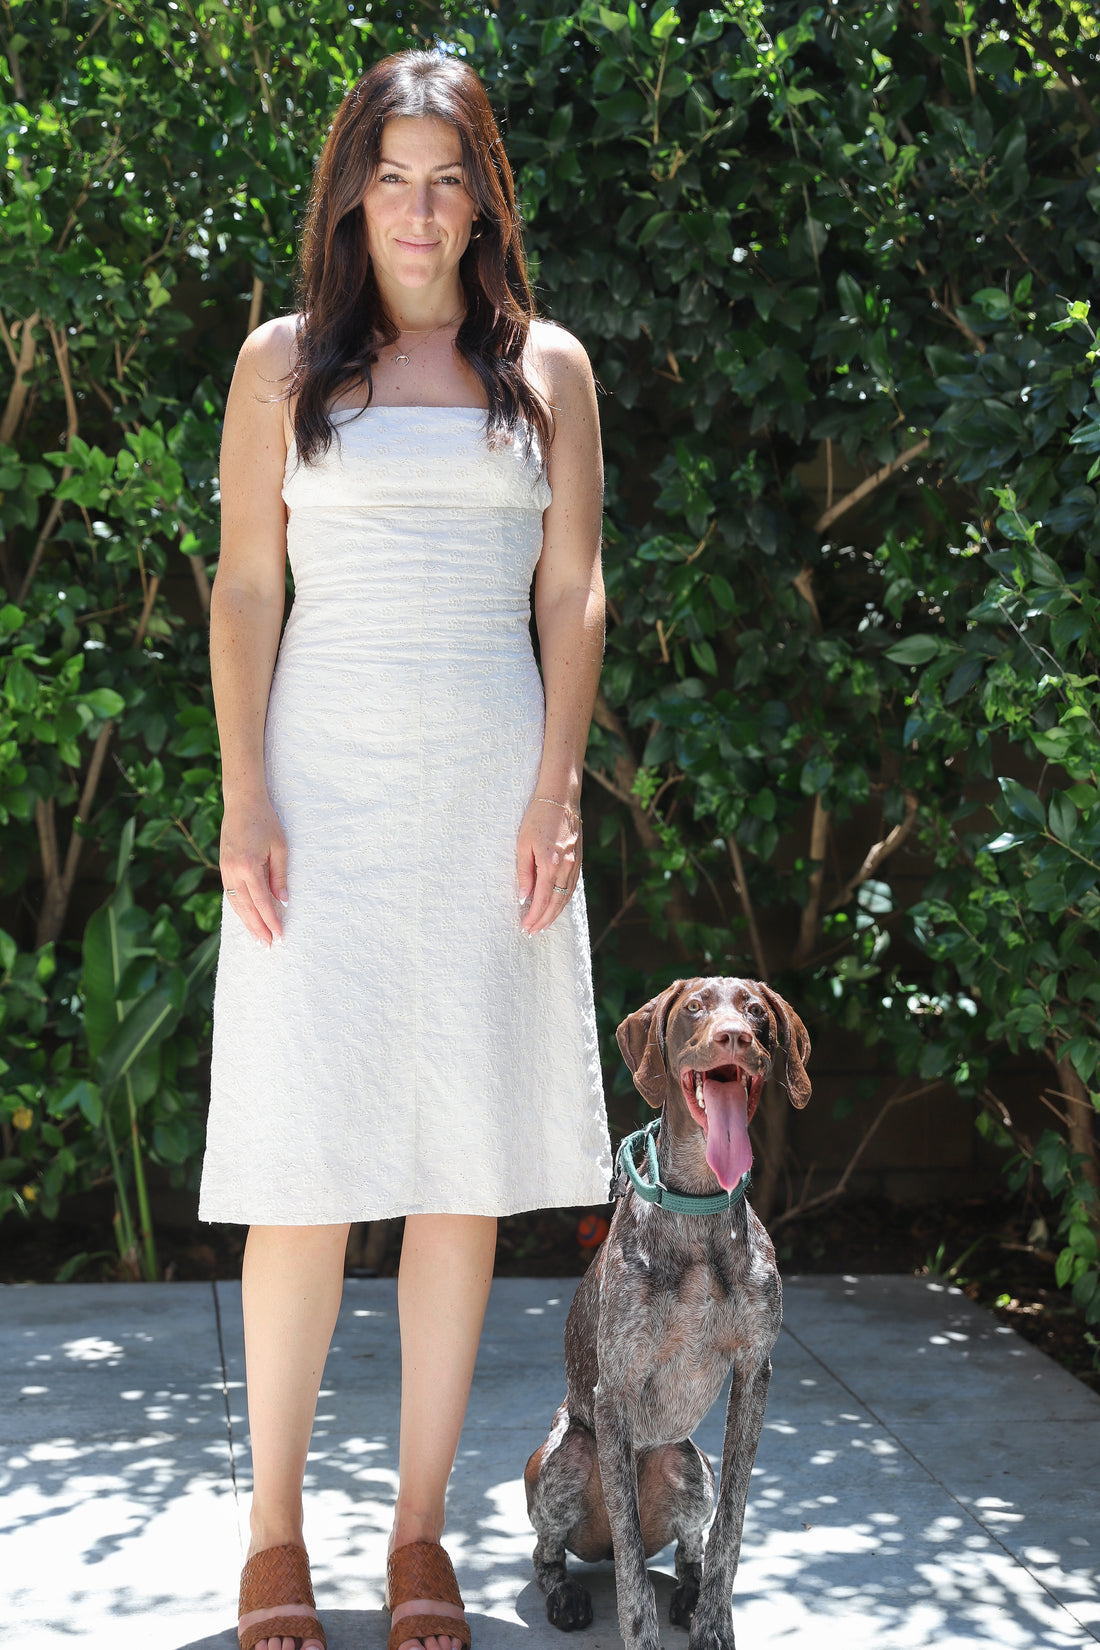 Model standing up straight facing the camera next to a dog.